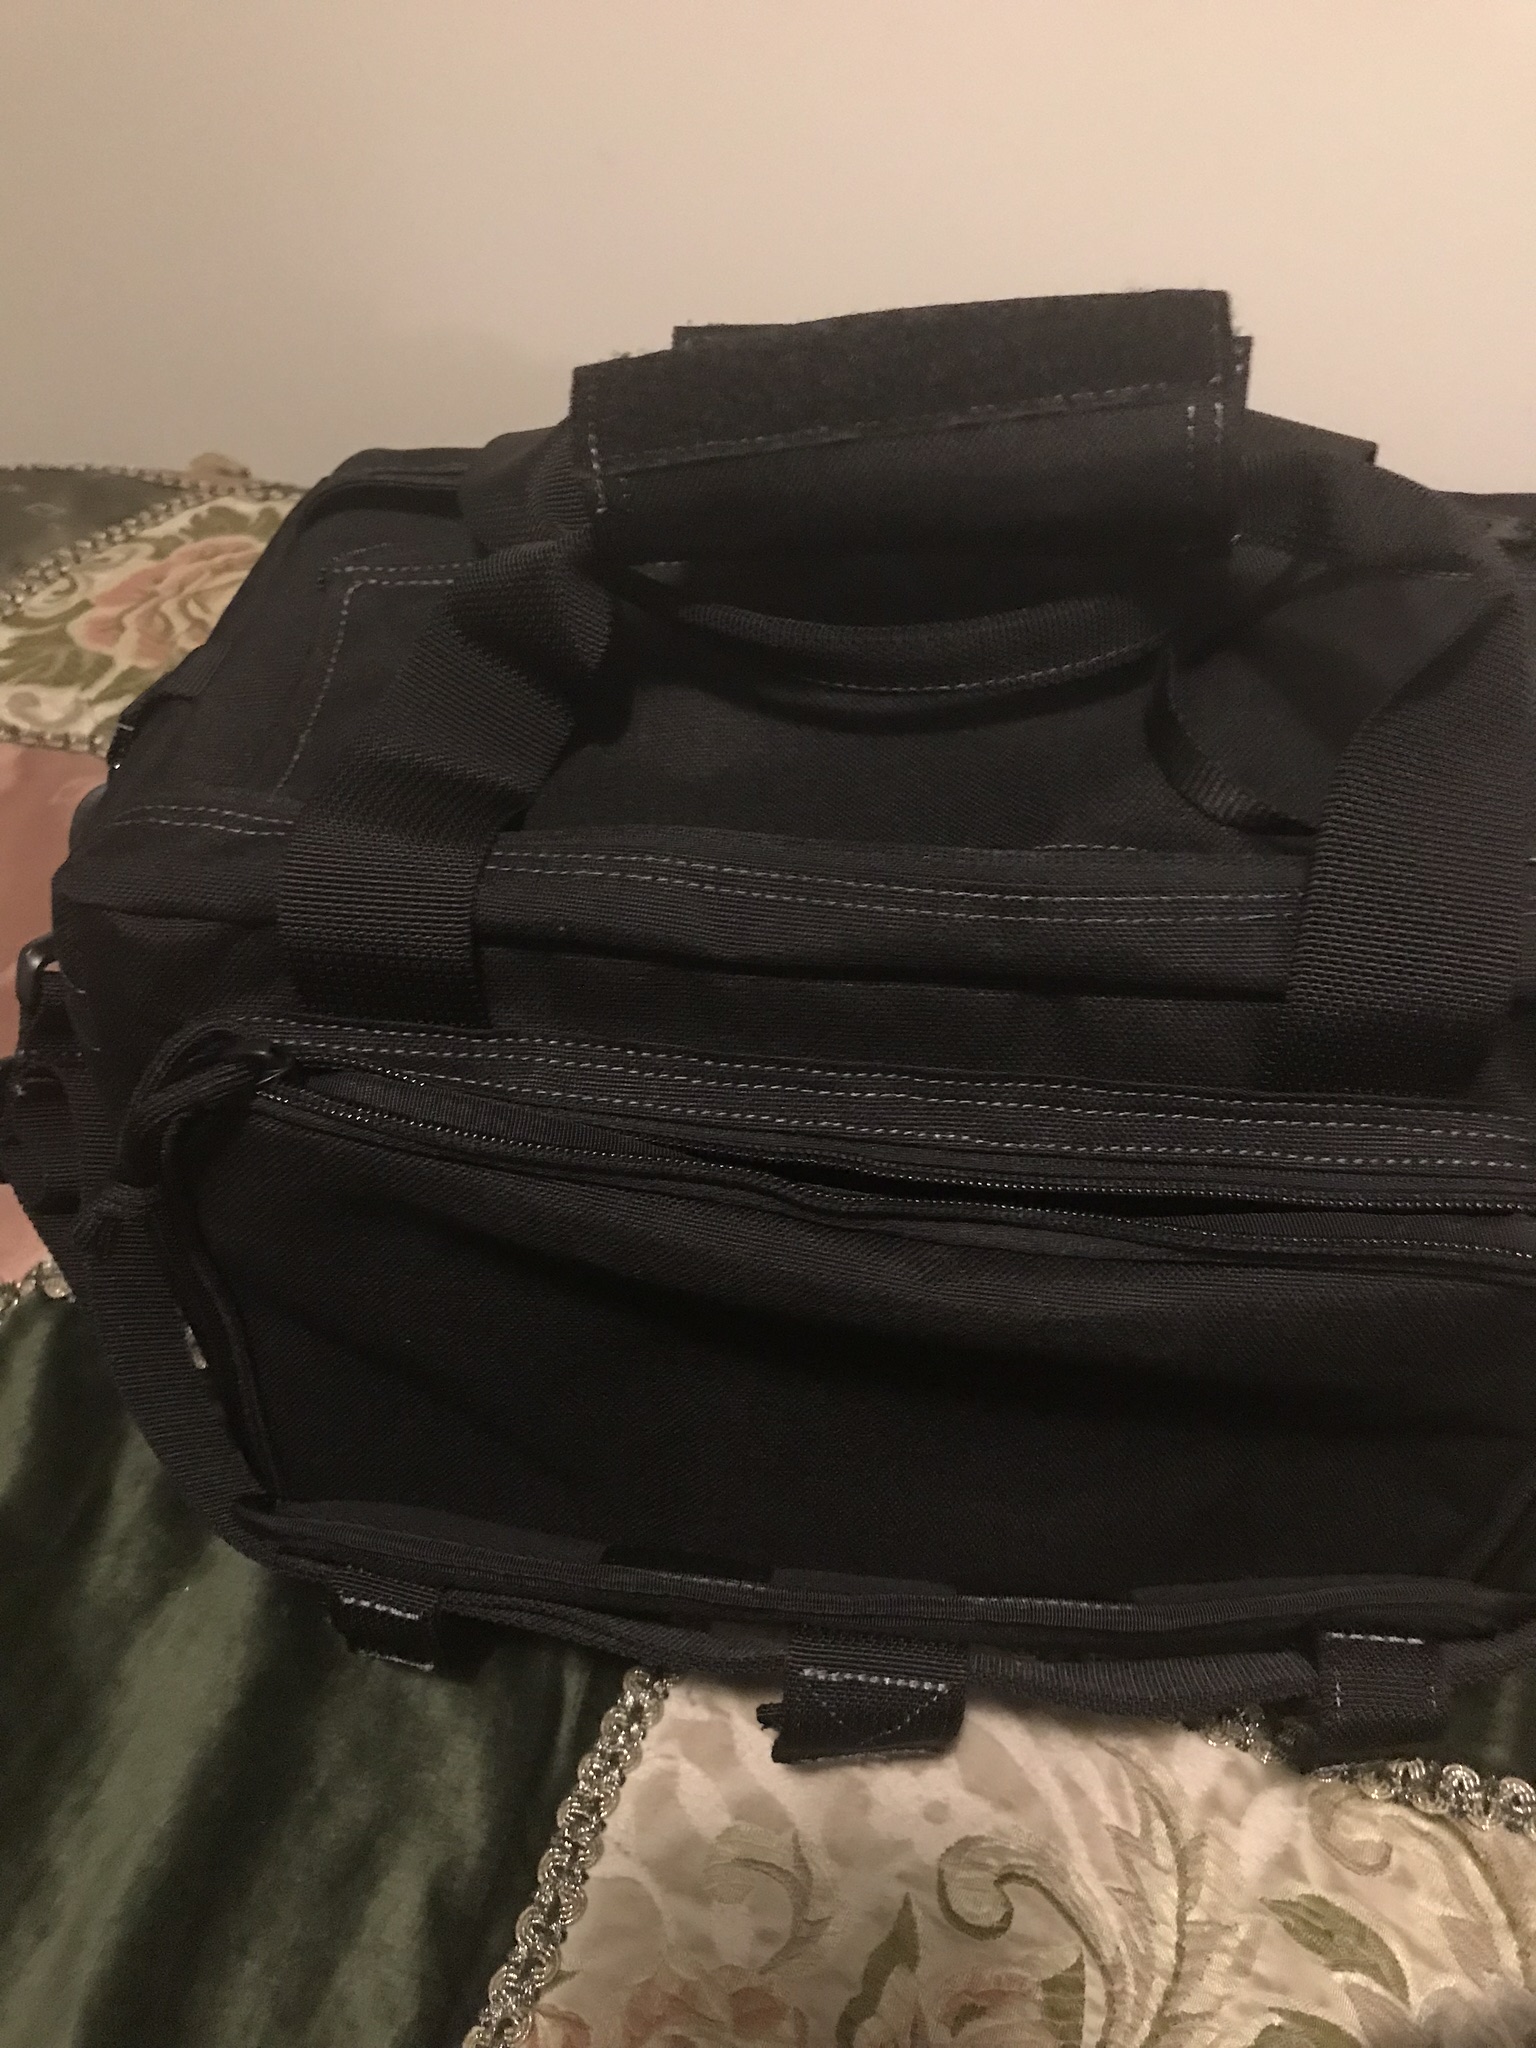 Review: 5.11 LV10 2.0 Sling Pack - The Armory Life